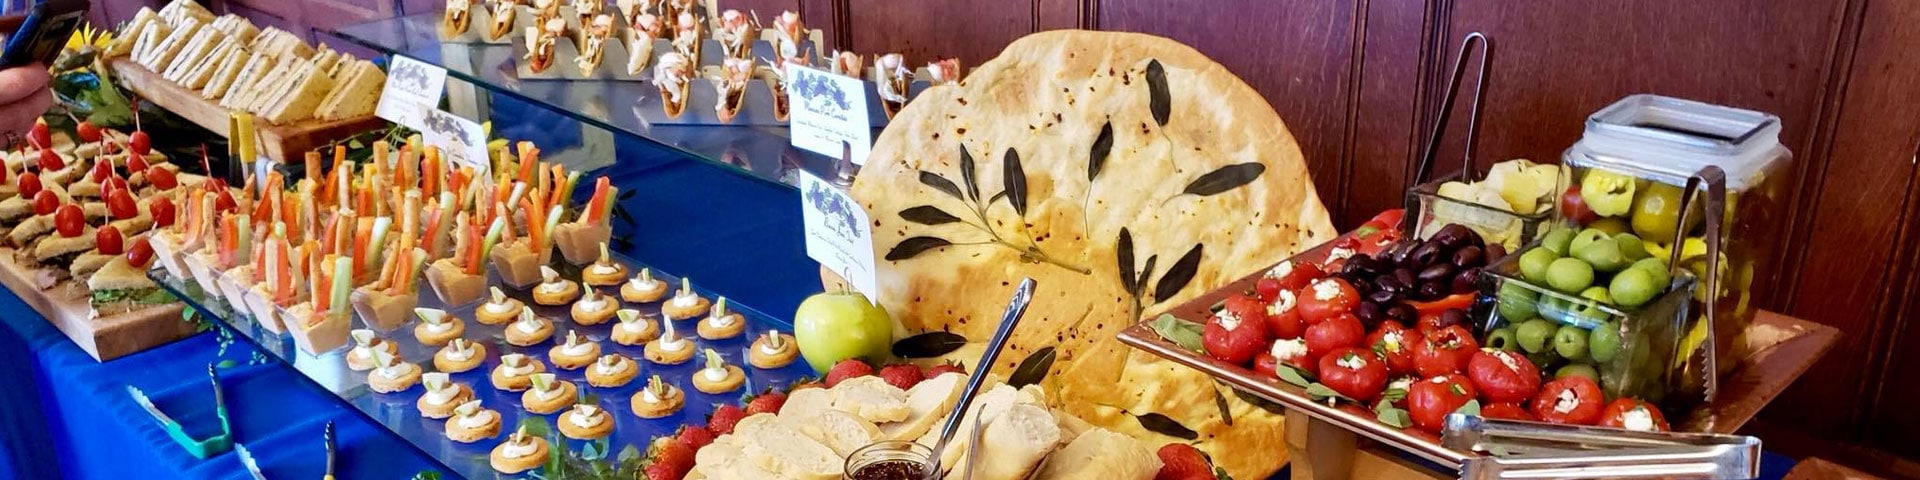 finger food table display by Normandy Catering